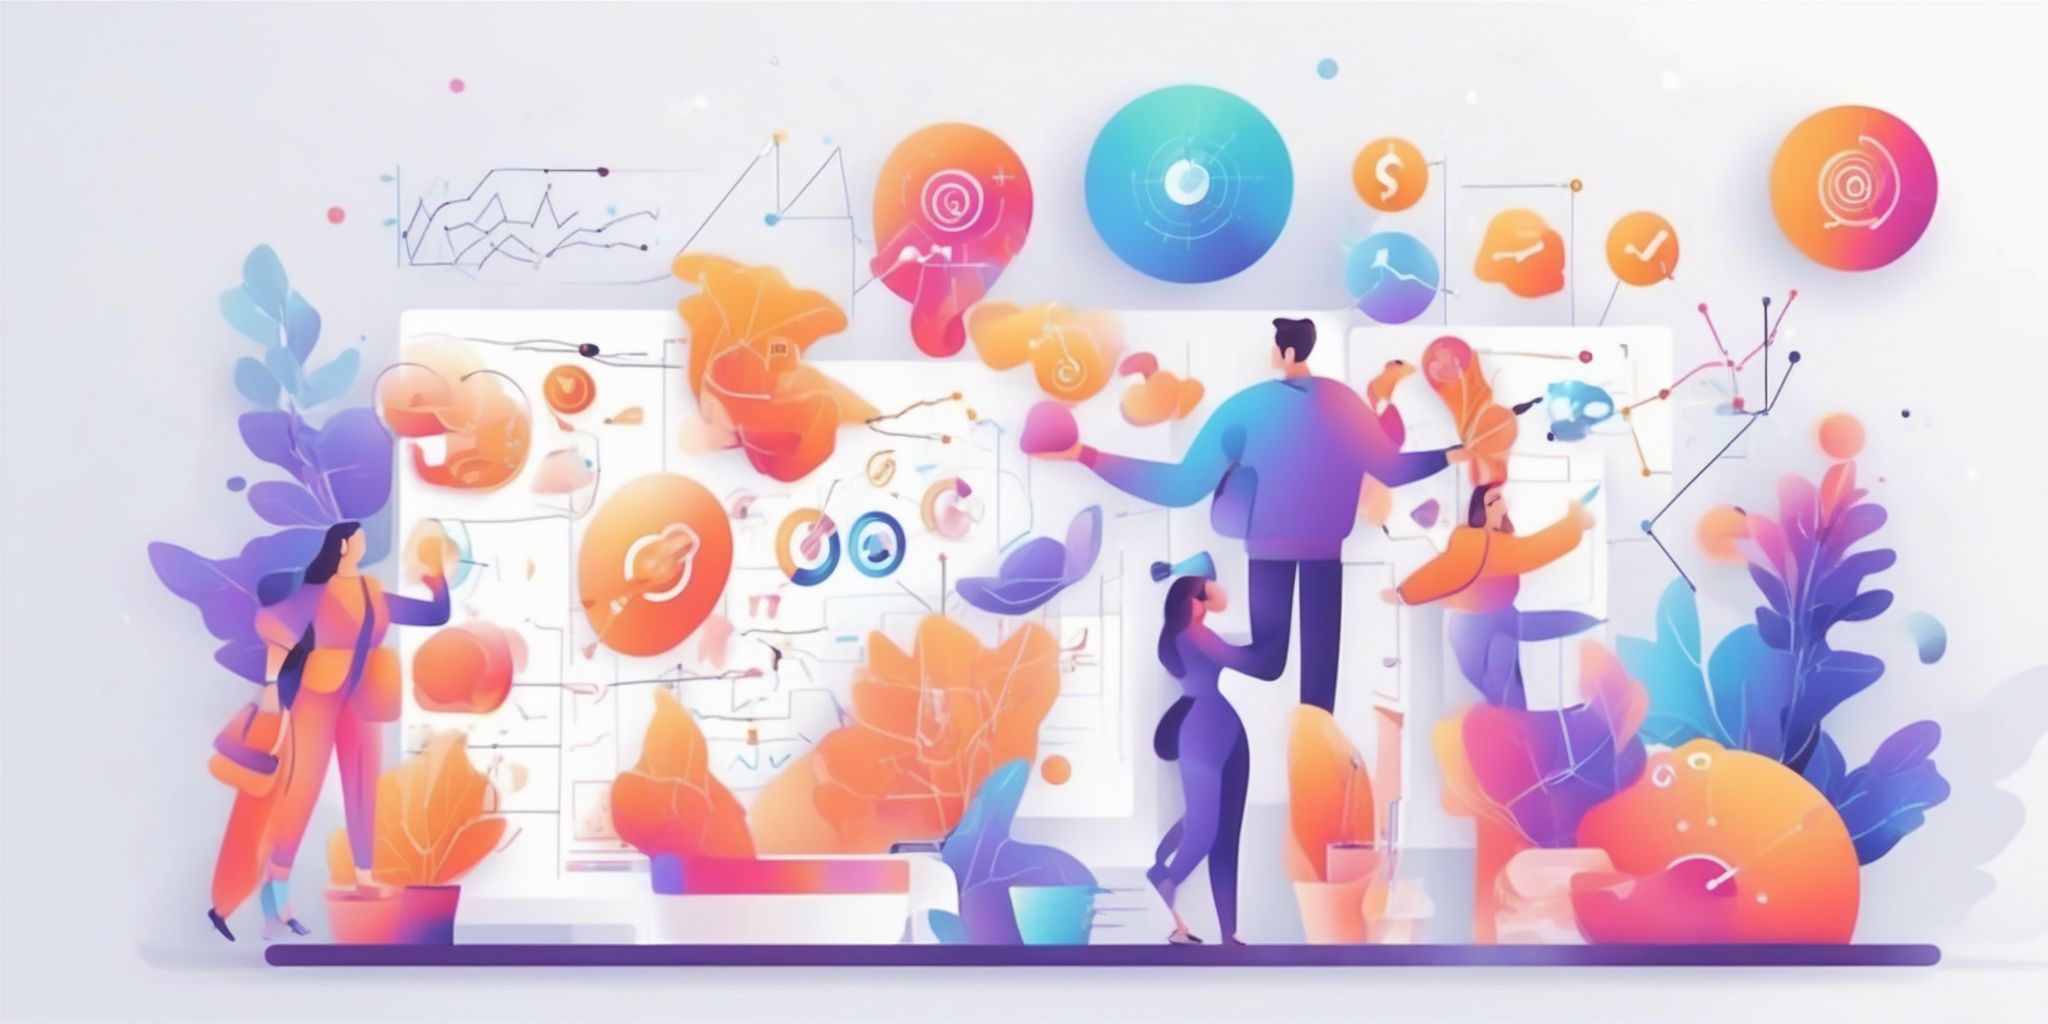 Marketing strategy in illustration style with gradients and white background